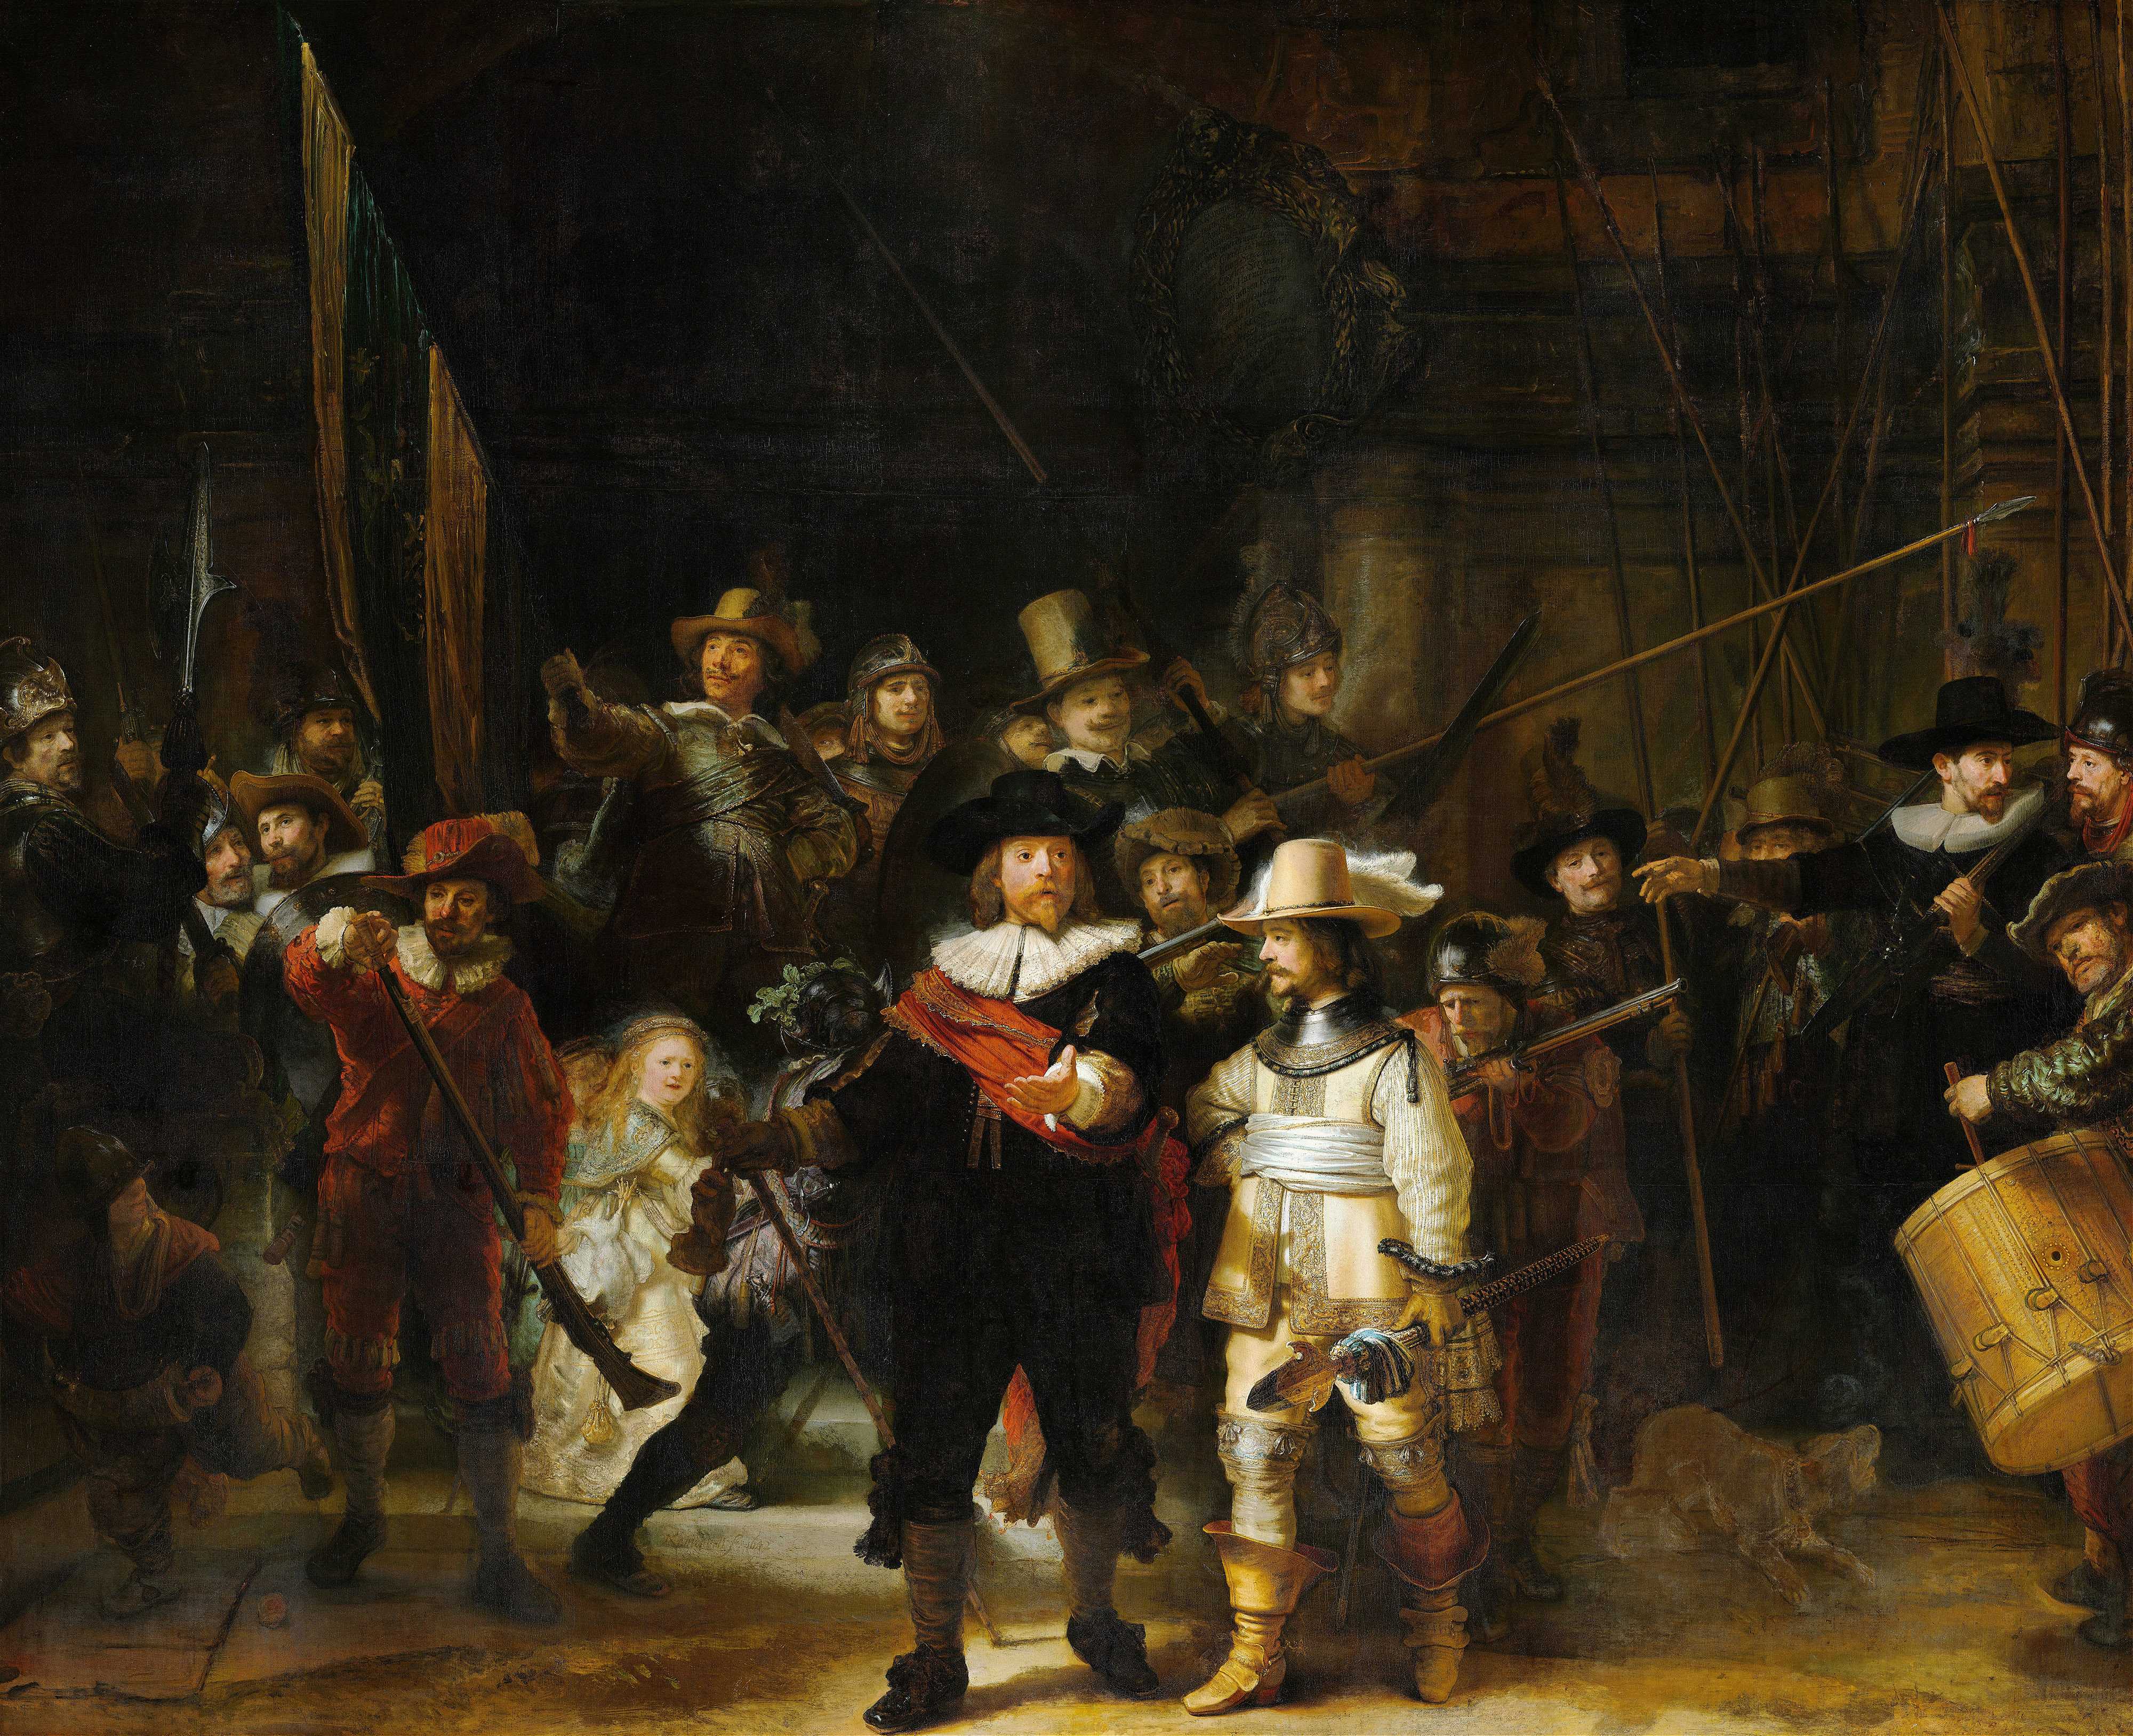 Find out more about Rembrandt van Rijn - Night Watch, Militia Company of District II under the Command of Captain Frans Banninck Cocq